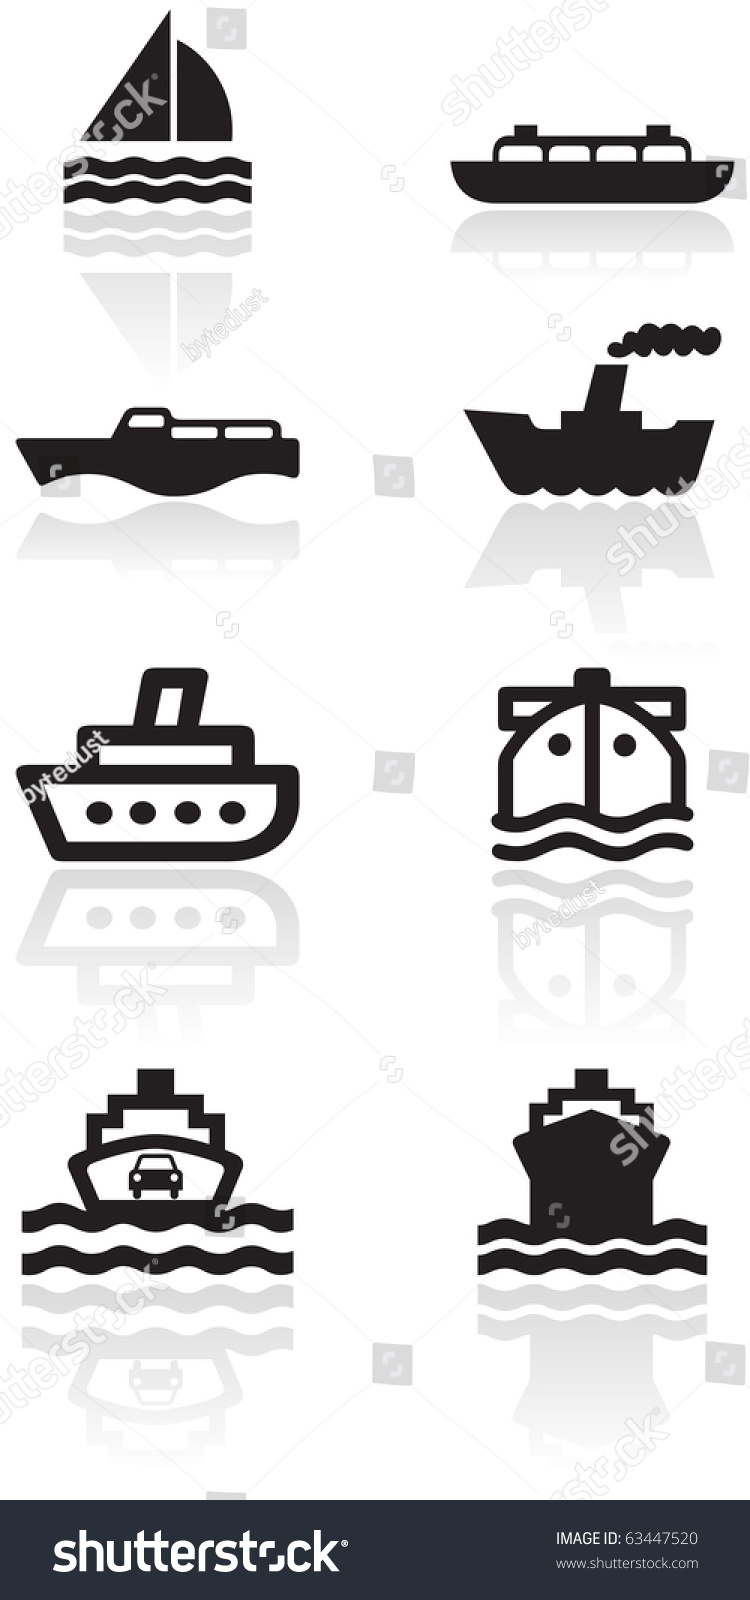 SVG of Vector set of different boat illustrations or symbols. All vector objects are isolated. Colors and transparent background color are easy to adjust. svg